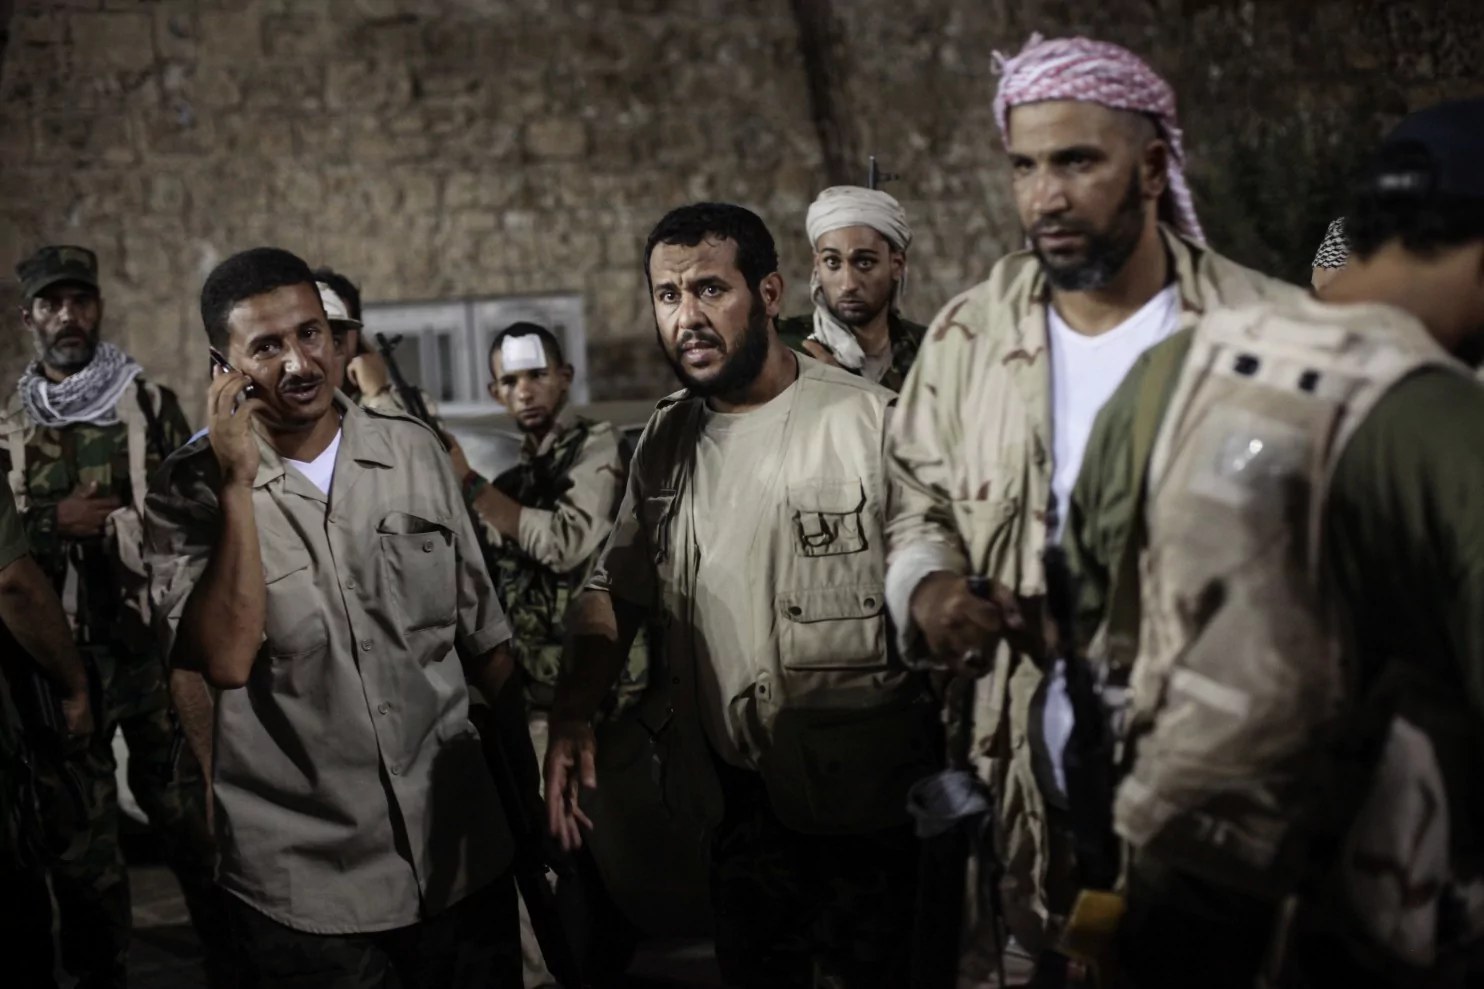 These Libyans were once linked to al-Qaeda. Now they are politicians and businessmen.